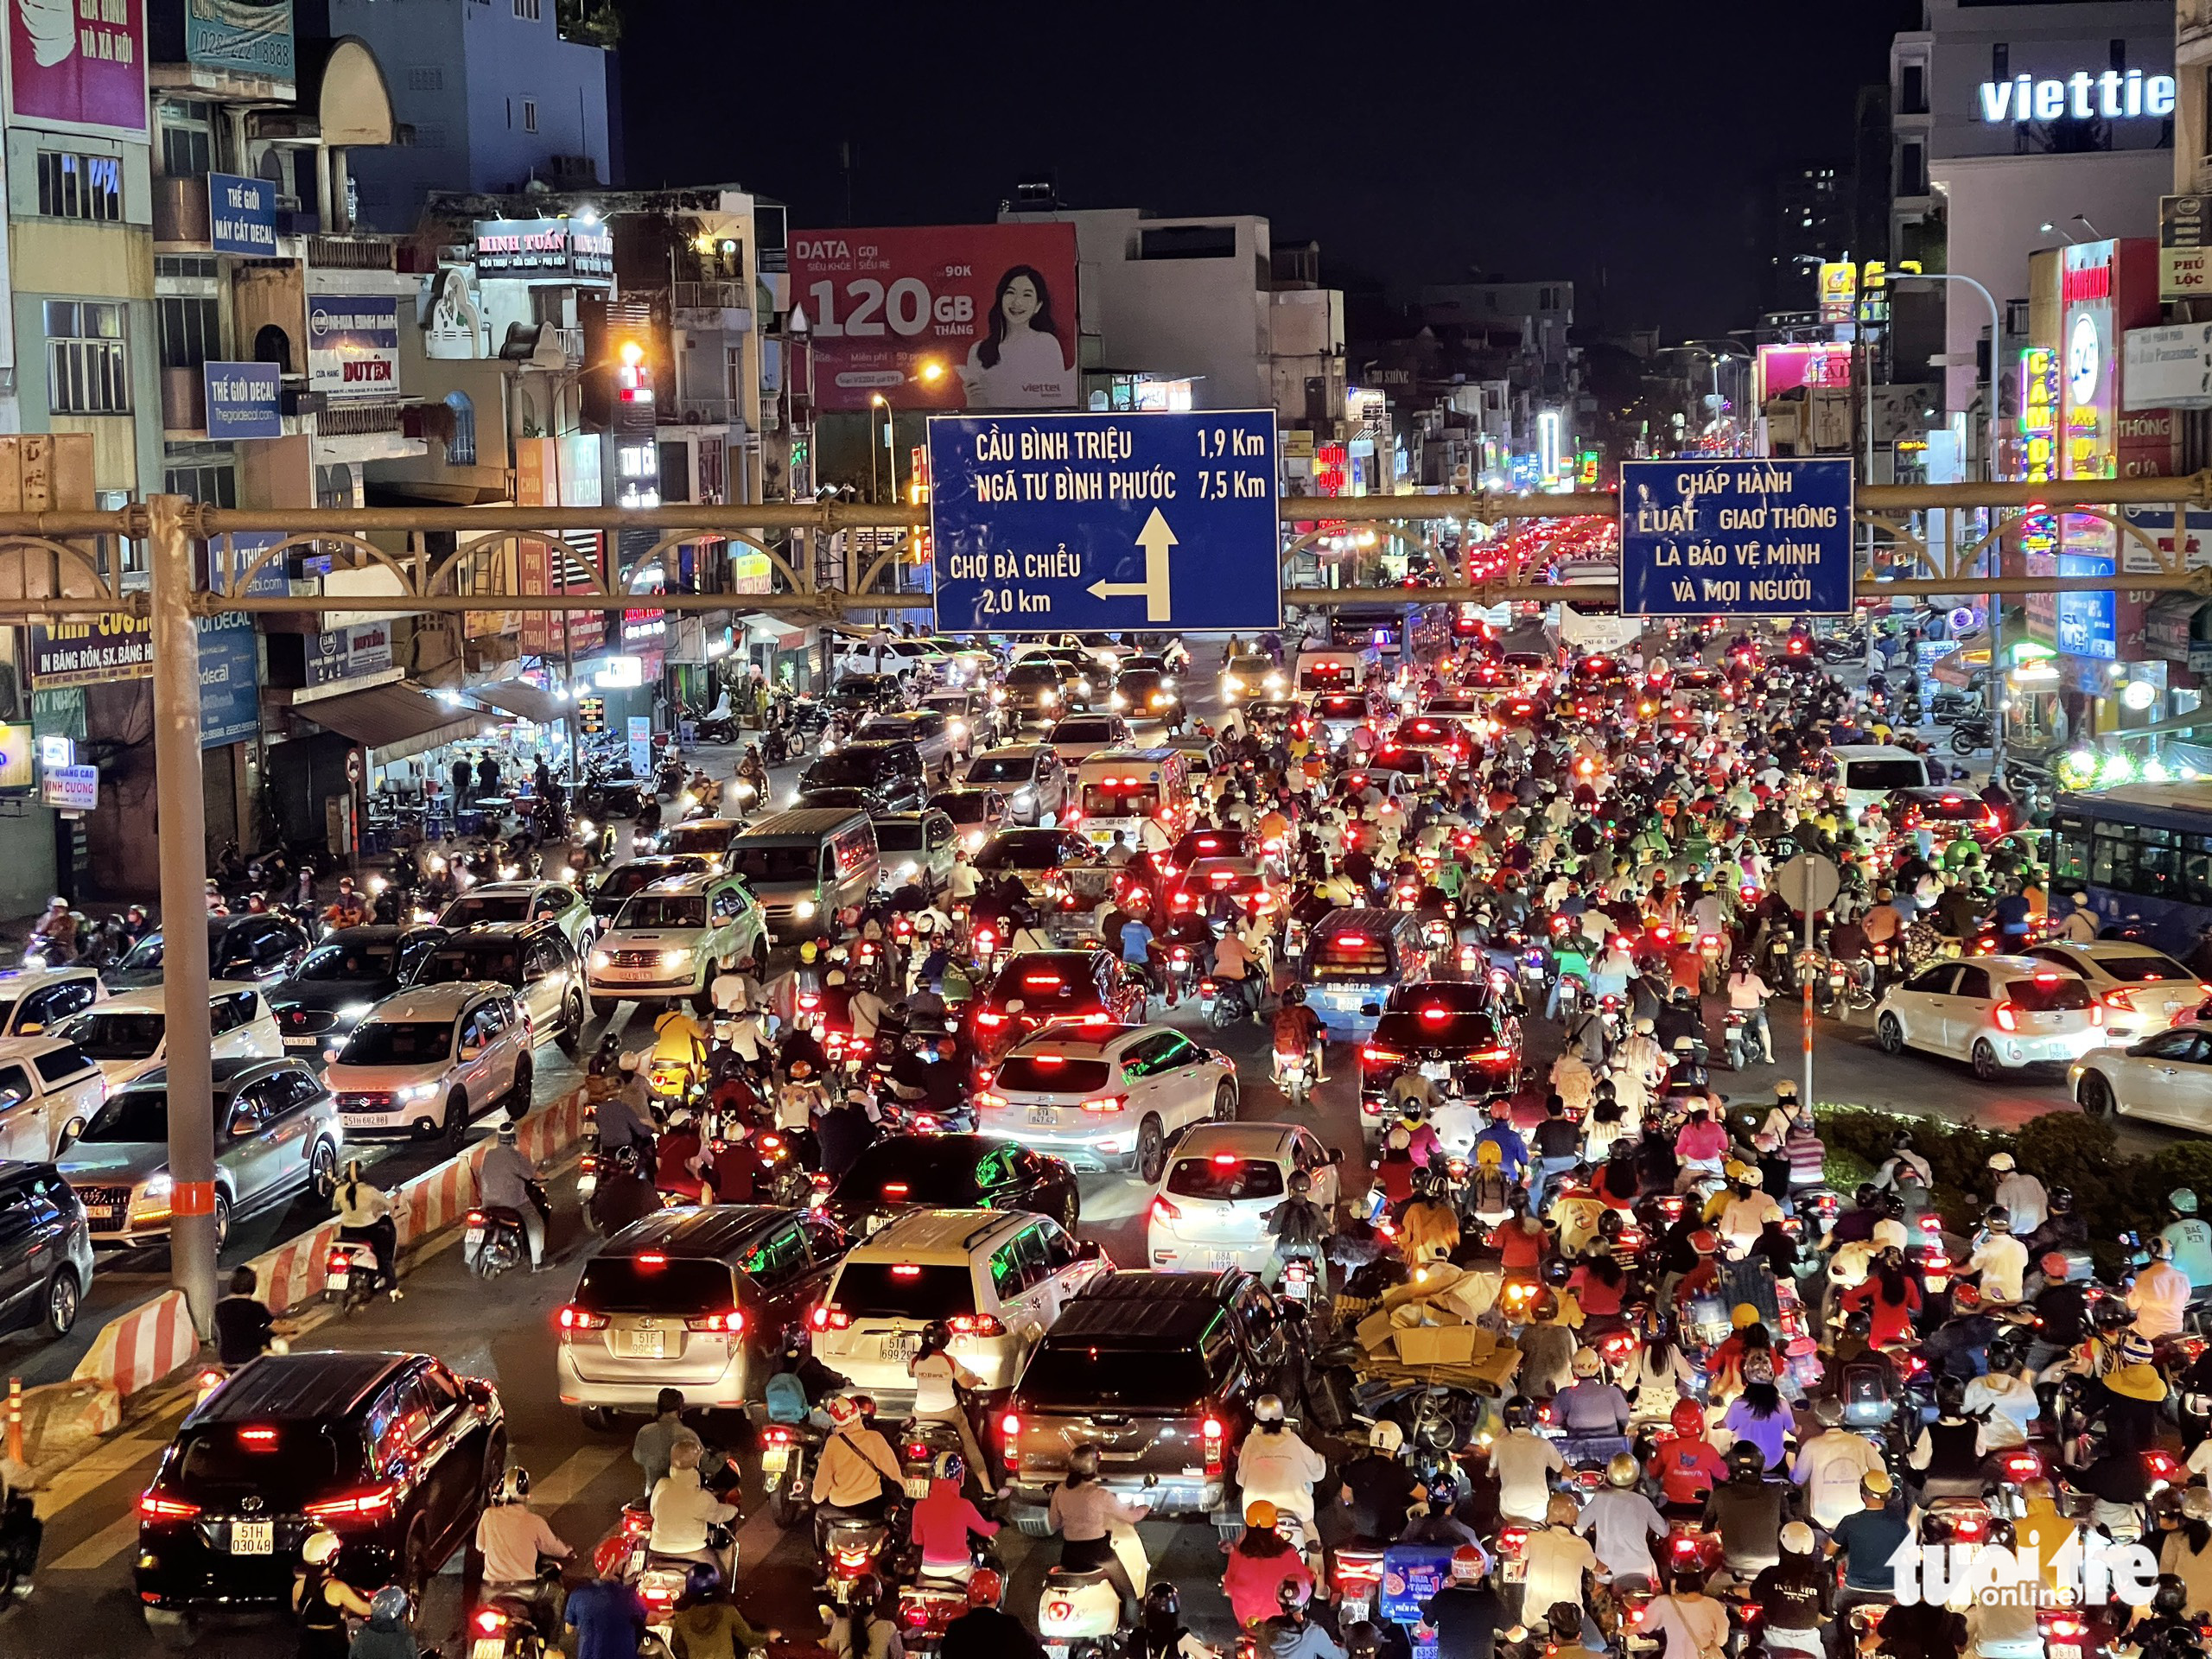 Traffic congestion occurs at Hang Xanh Intersection in Binh Thanh District, Ho Chi Minh City, December 24, 2021. Photo: L.P. / Tuoi Tre